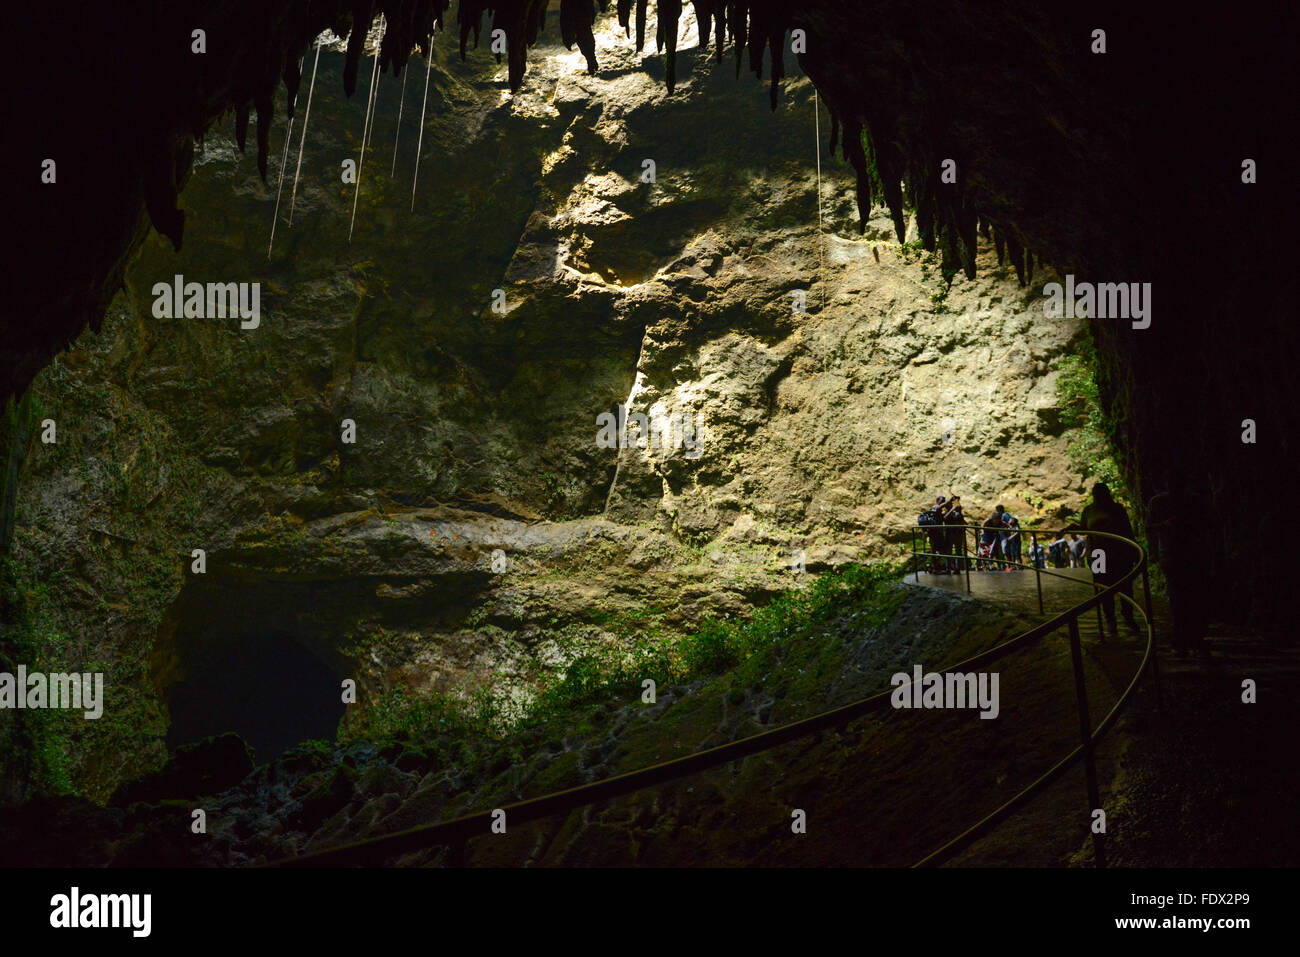 Tourists observing some stalactites at the Camuy River Cave Park. PUERTO RICO - Caribbean Island. US territory. Stock Photo